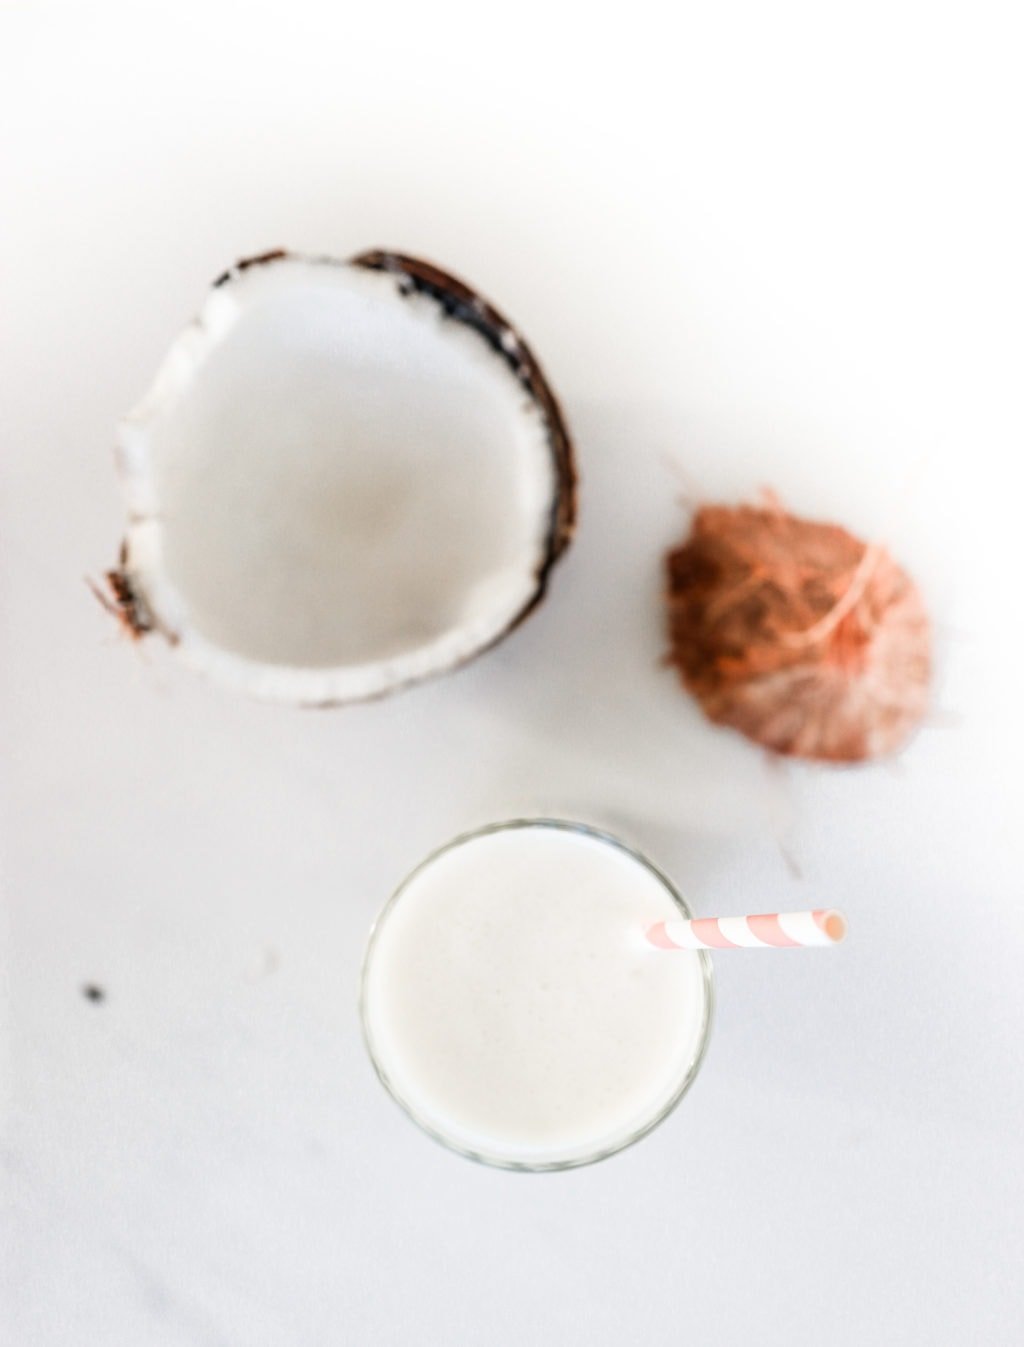 A pina colada smoothie in a glass with a pink and white striped straw on a white surface with a broken coconut beside it. Ingredients include coconut milk, pineapple, banana, and plain Greek yogurt